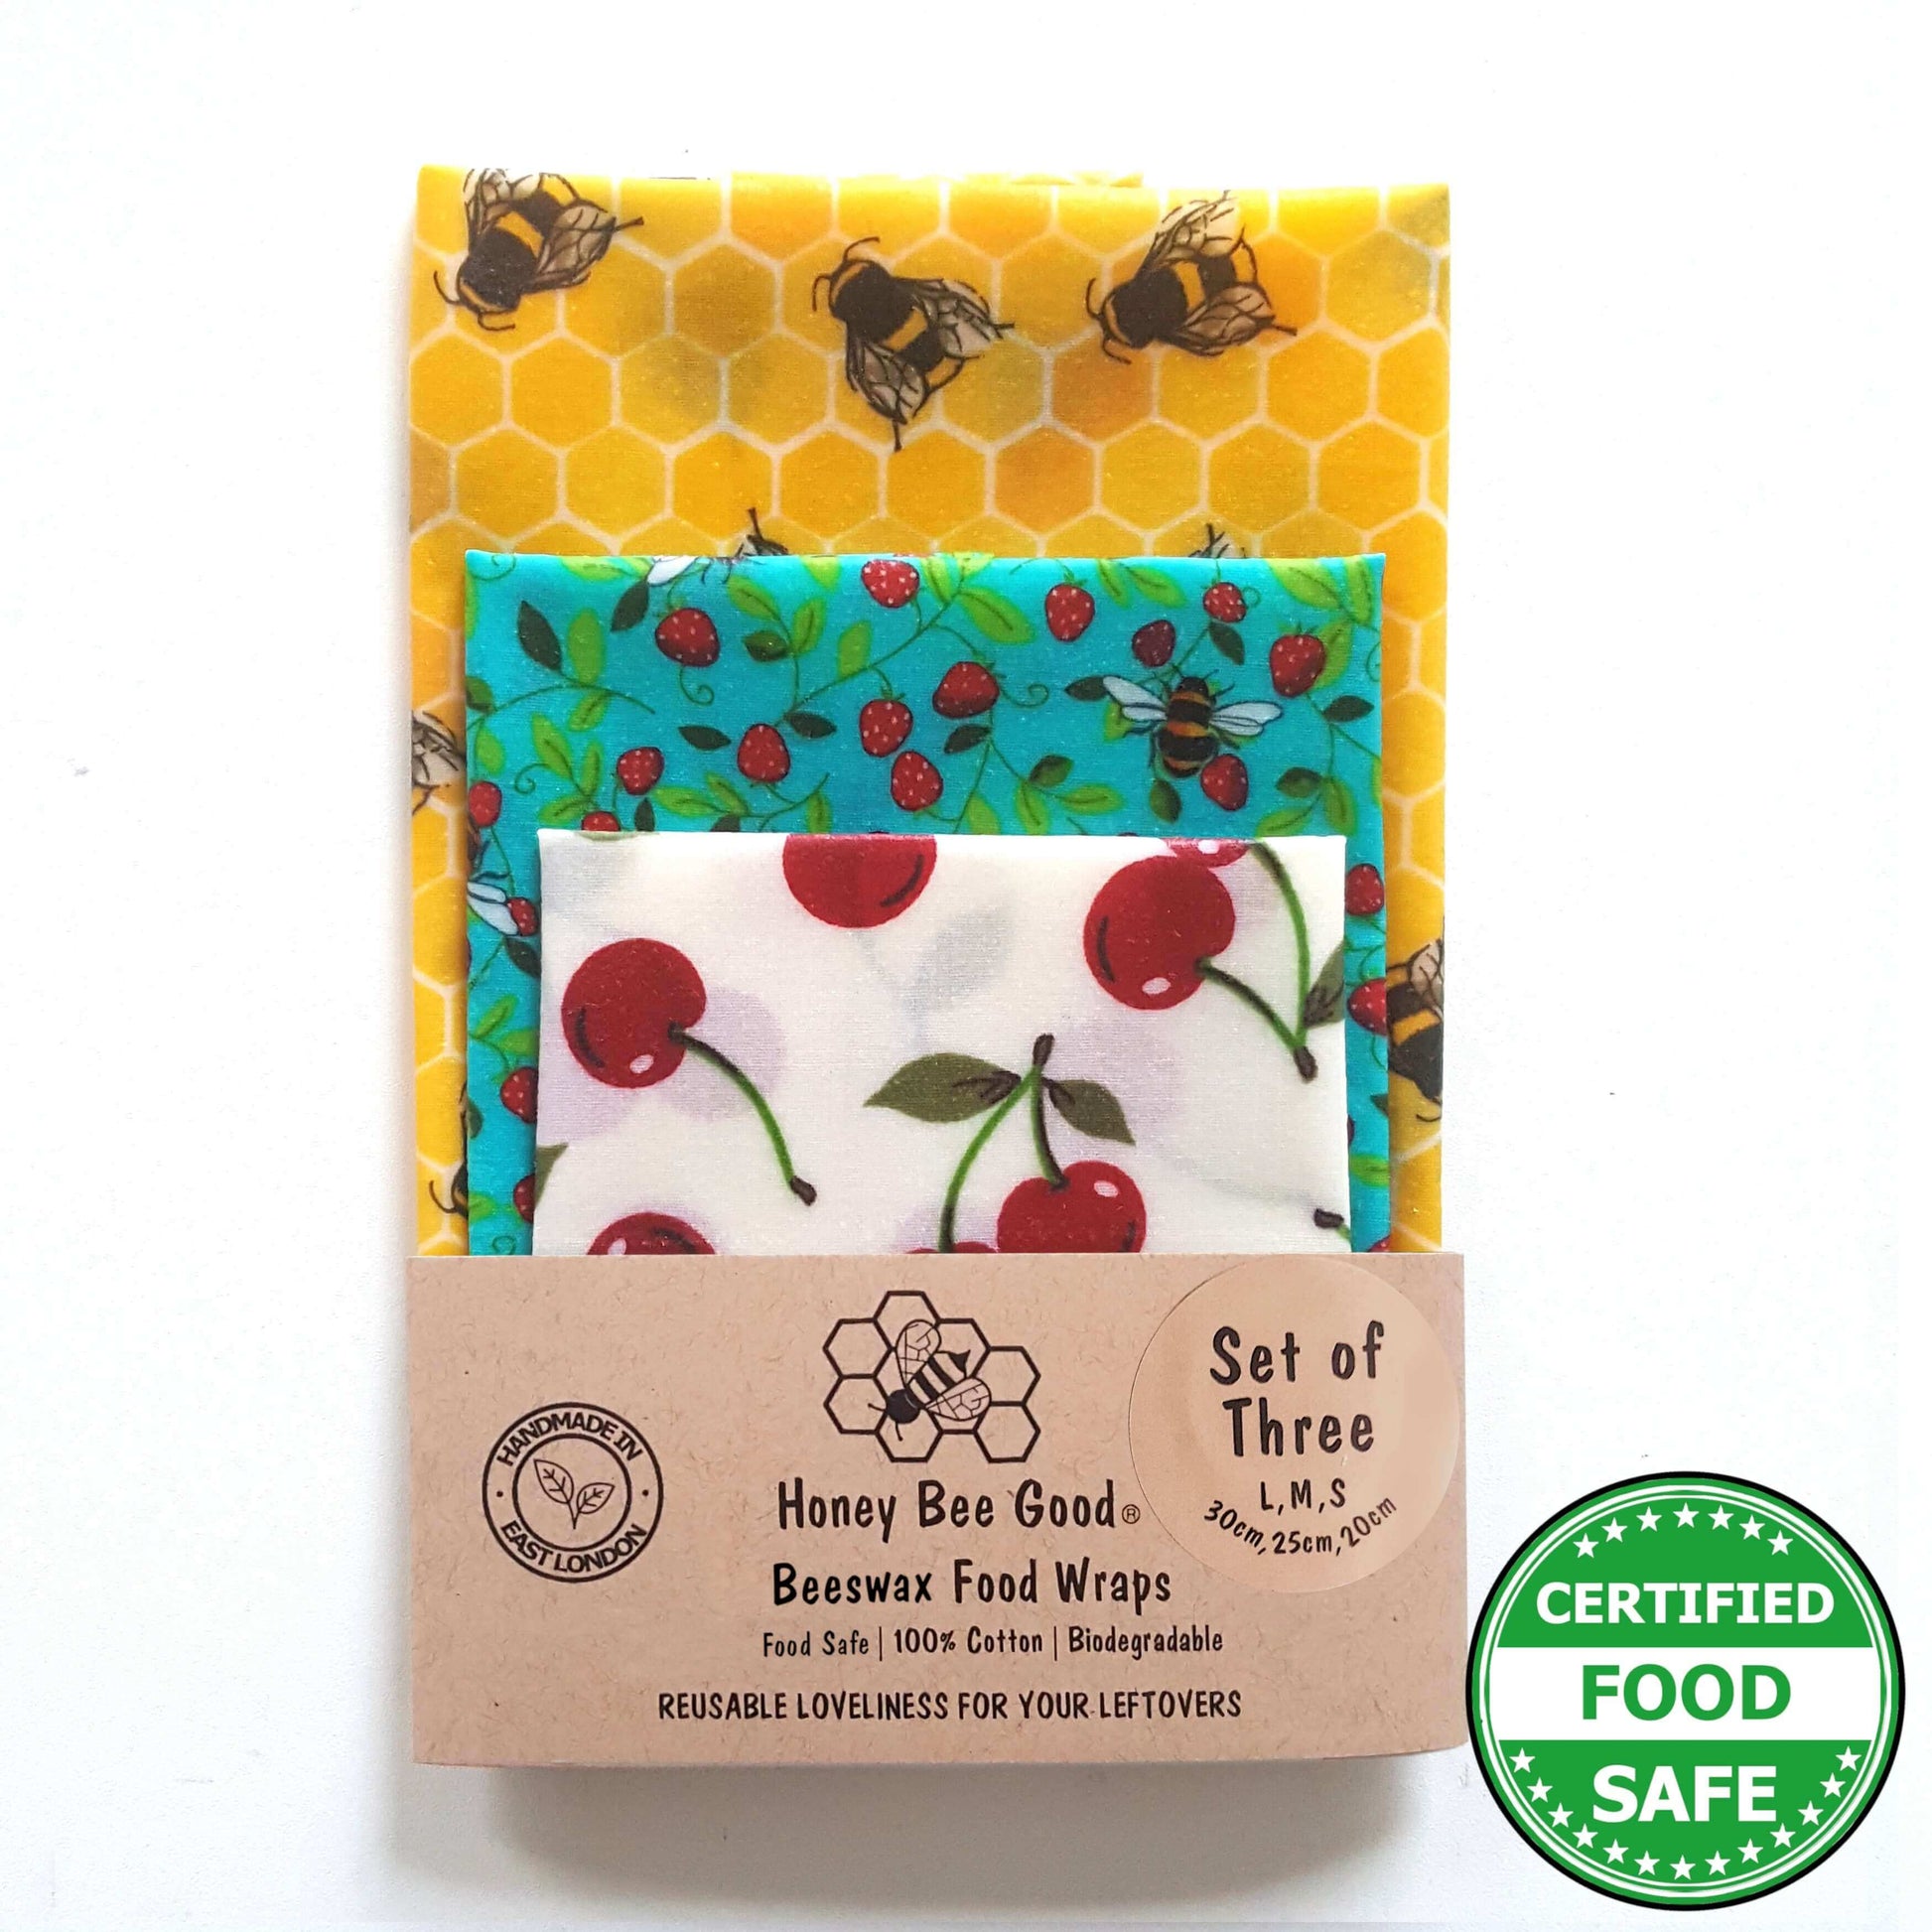 Reusable Beeswax Food Wraps 100% Hand Made in the UK by Honey Bee Good shown in Set of 3 Classic Bees & Cherries